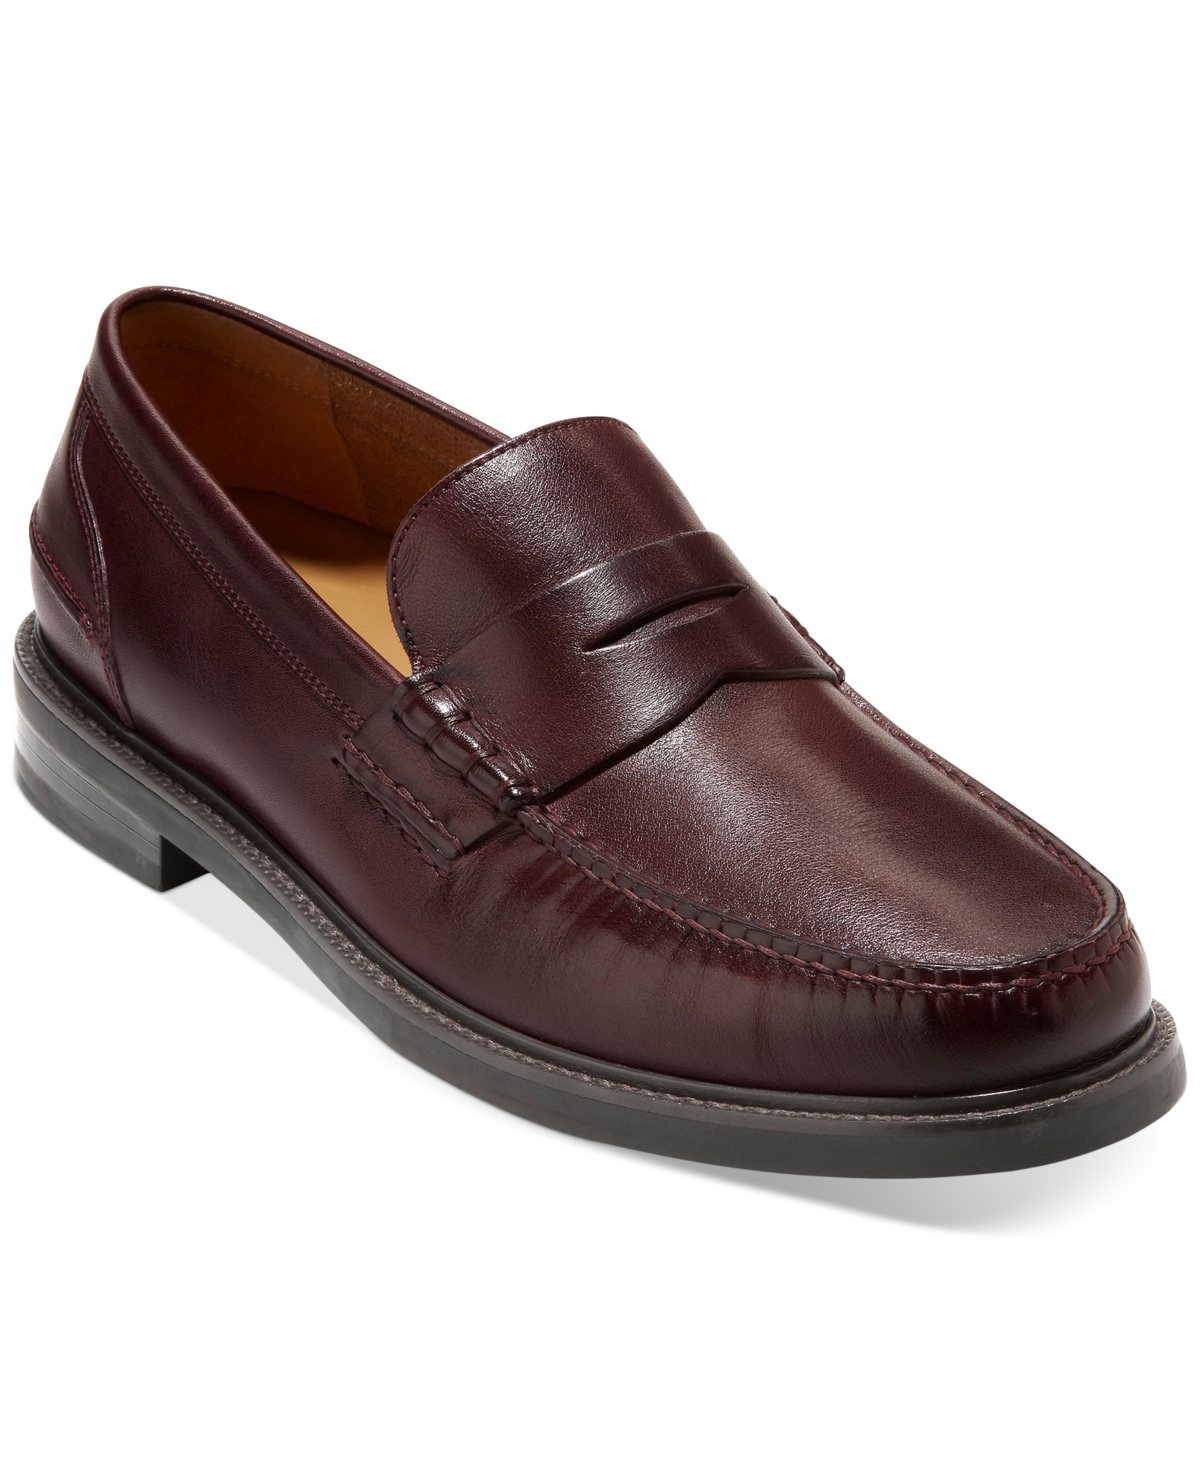 Cole Haan Men's Pinch Prep Slip-On Penny Loafers Men's Shoes